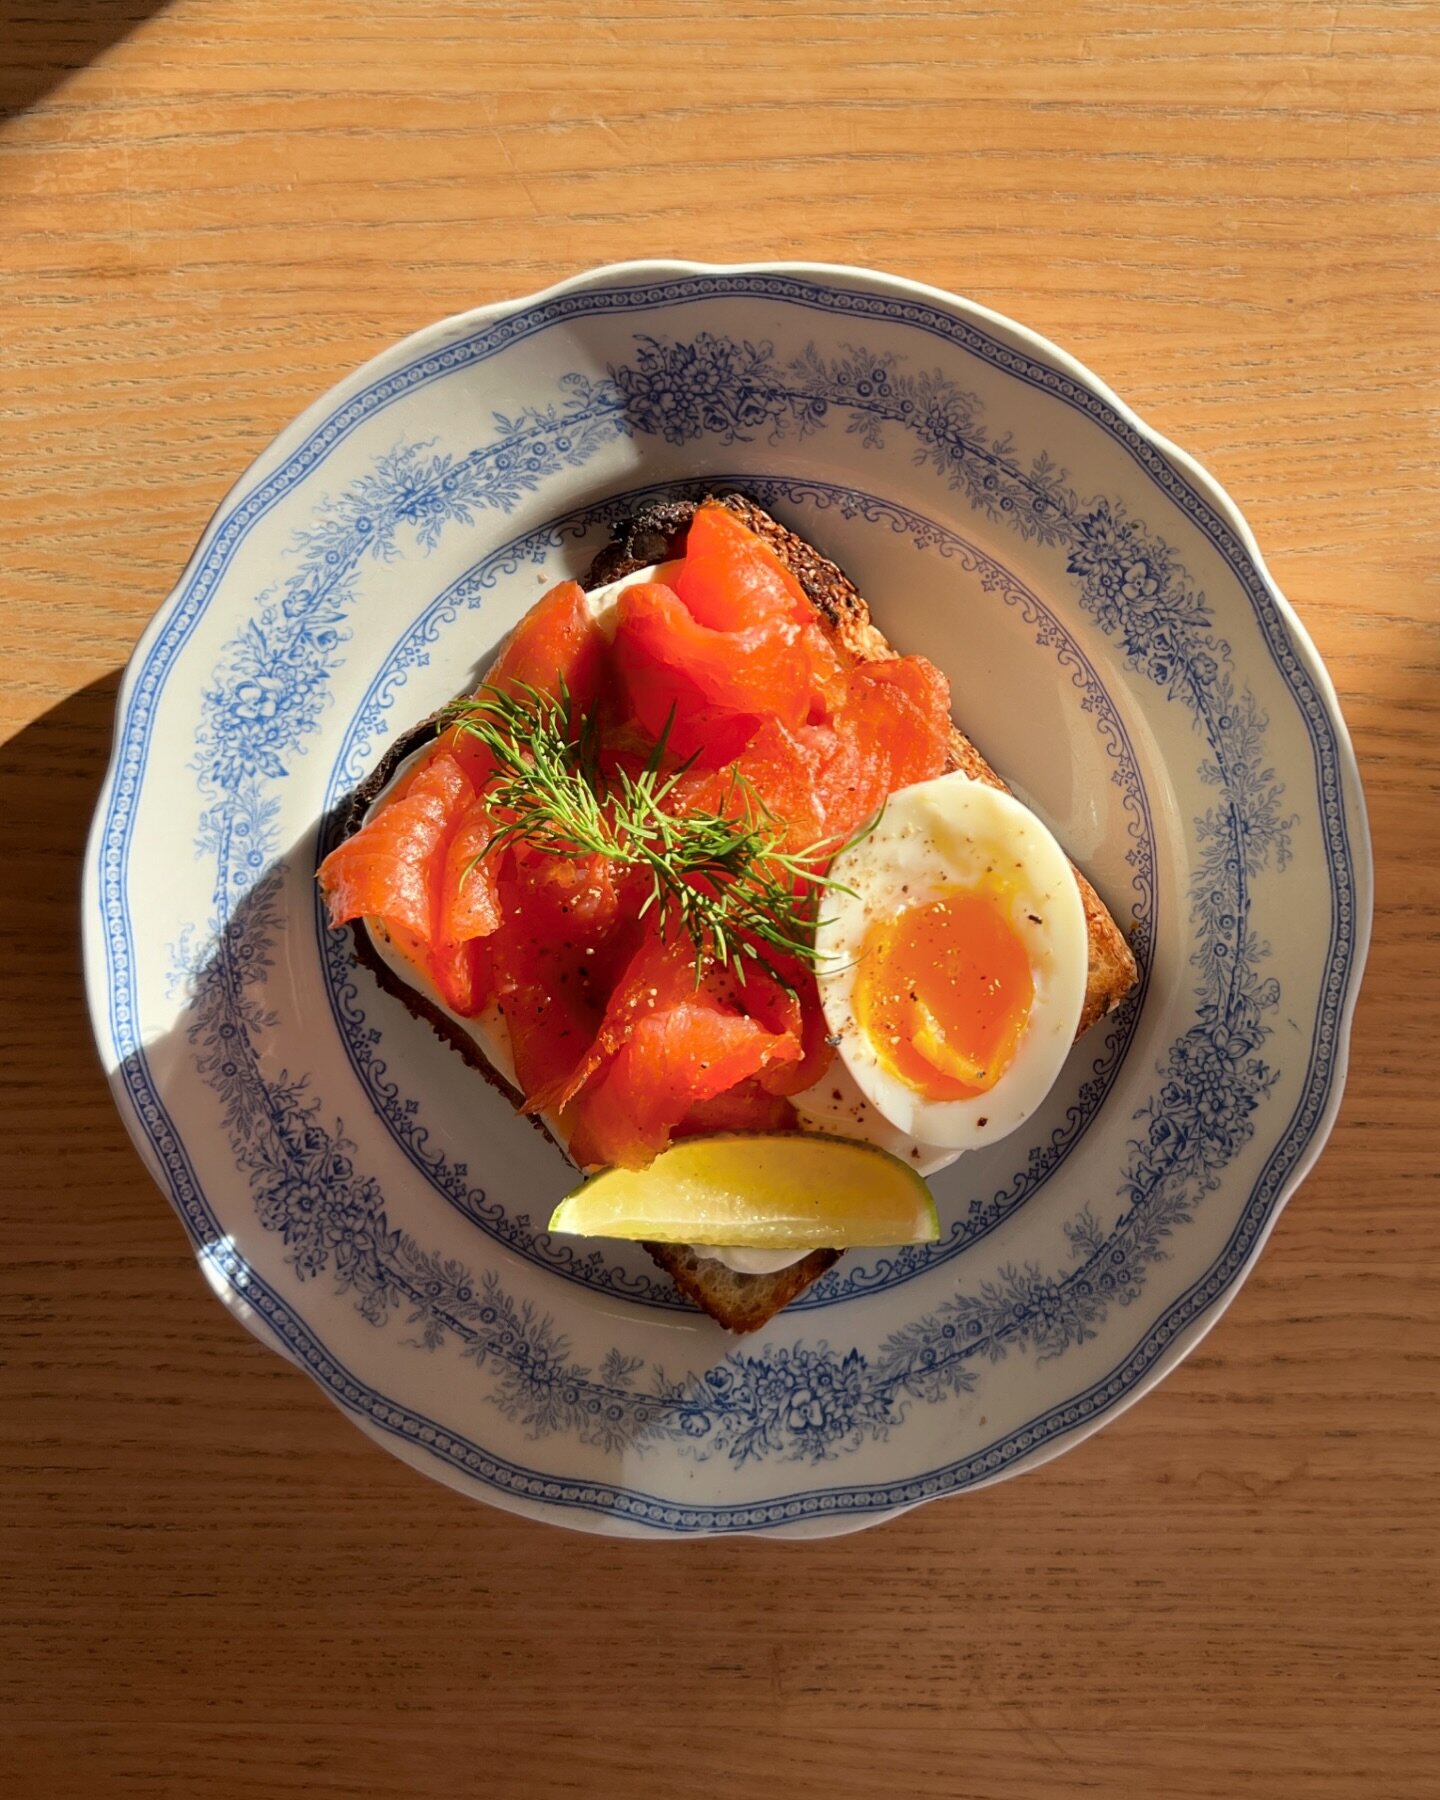 A classic combination of cold smoked salmon and cream cheese, with a sprinkle of dill and a boiled egg on a toasted sourdough.

A perfect way to start the week.

#way #helsinki